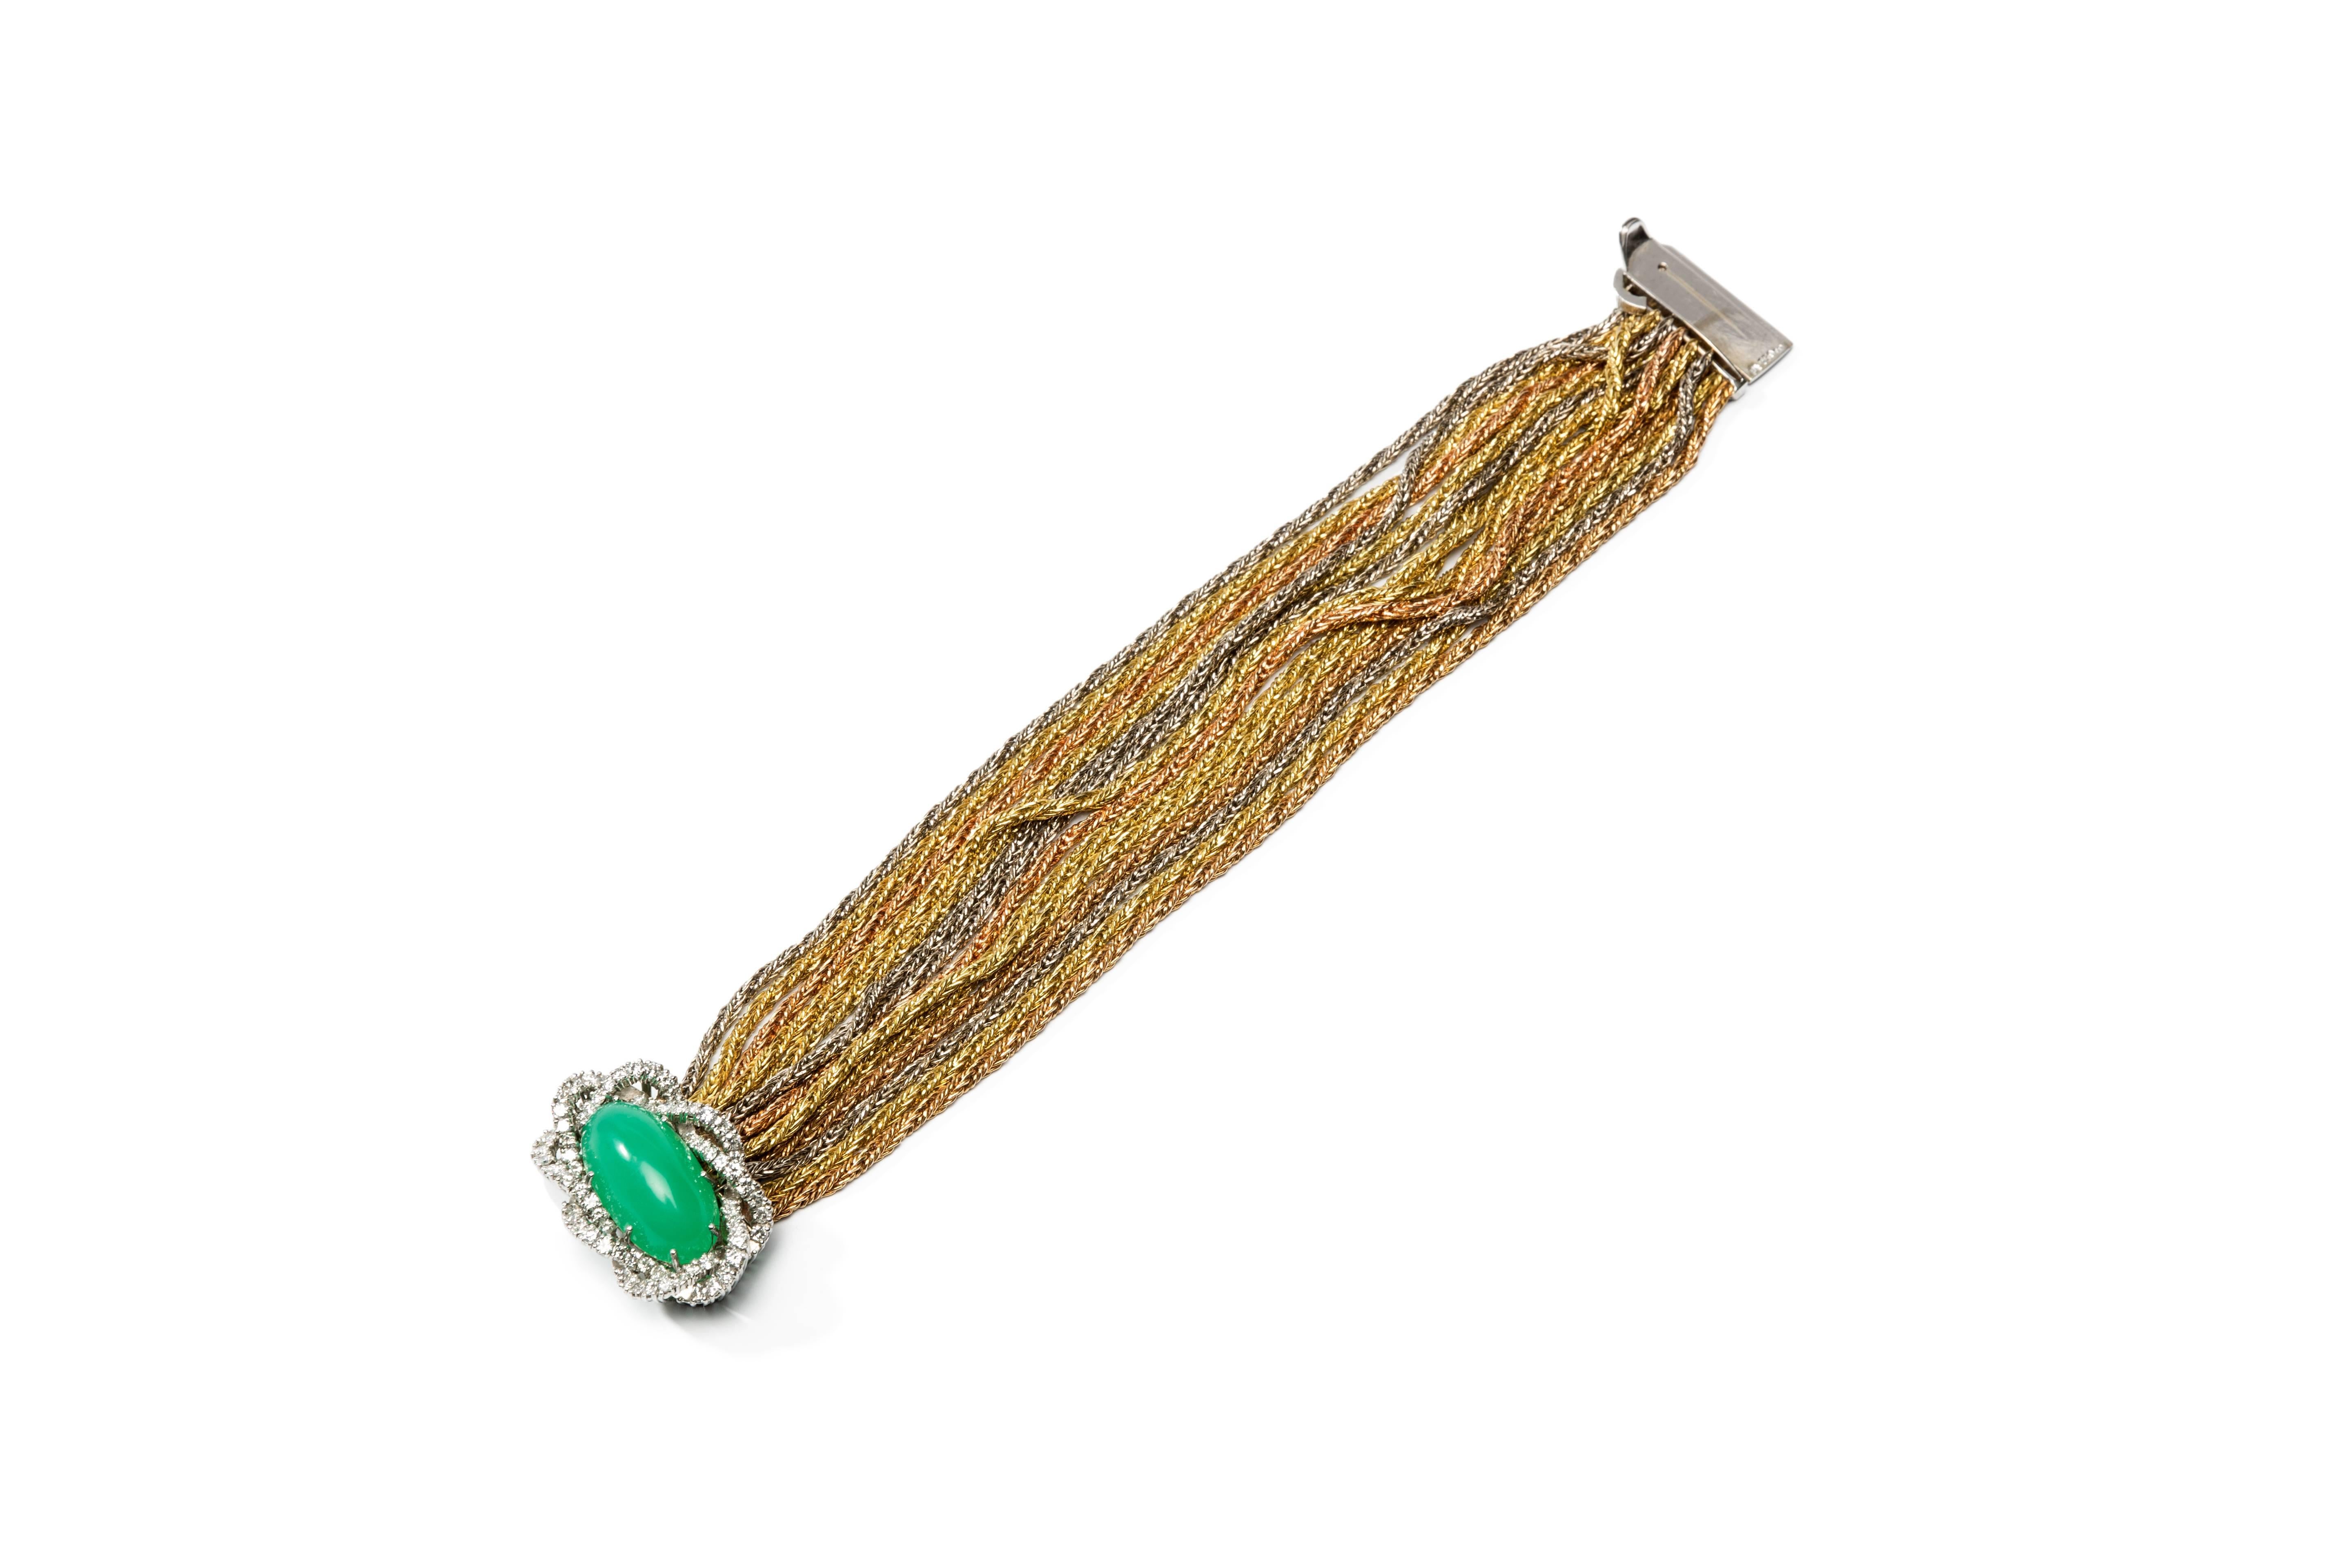 Large chrysoprase cabochon as eye-catcher, surrounded by 76 brilliant-cut diamonds weighing 2,58 ct., mounted in platinum, measurements are: 1.38 x 0.94 in ( 3,5 x 2,4 cm ). 14 ropes in 18 carat yellow- white- and red gold. 
Hallmarked on the clasp: